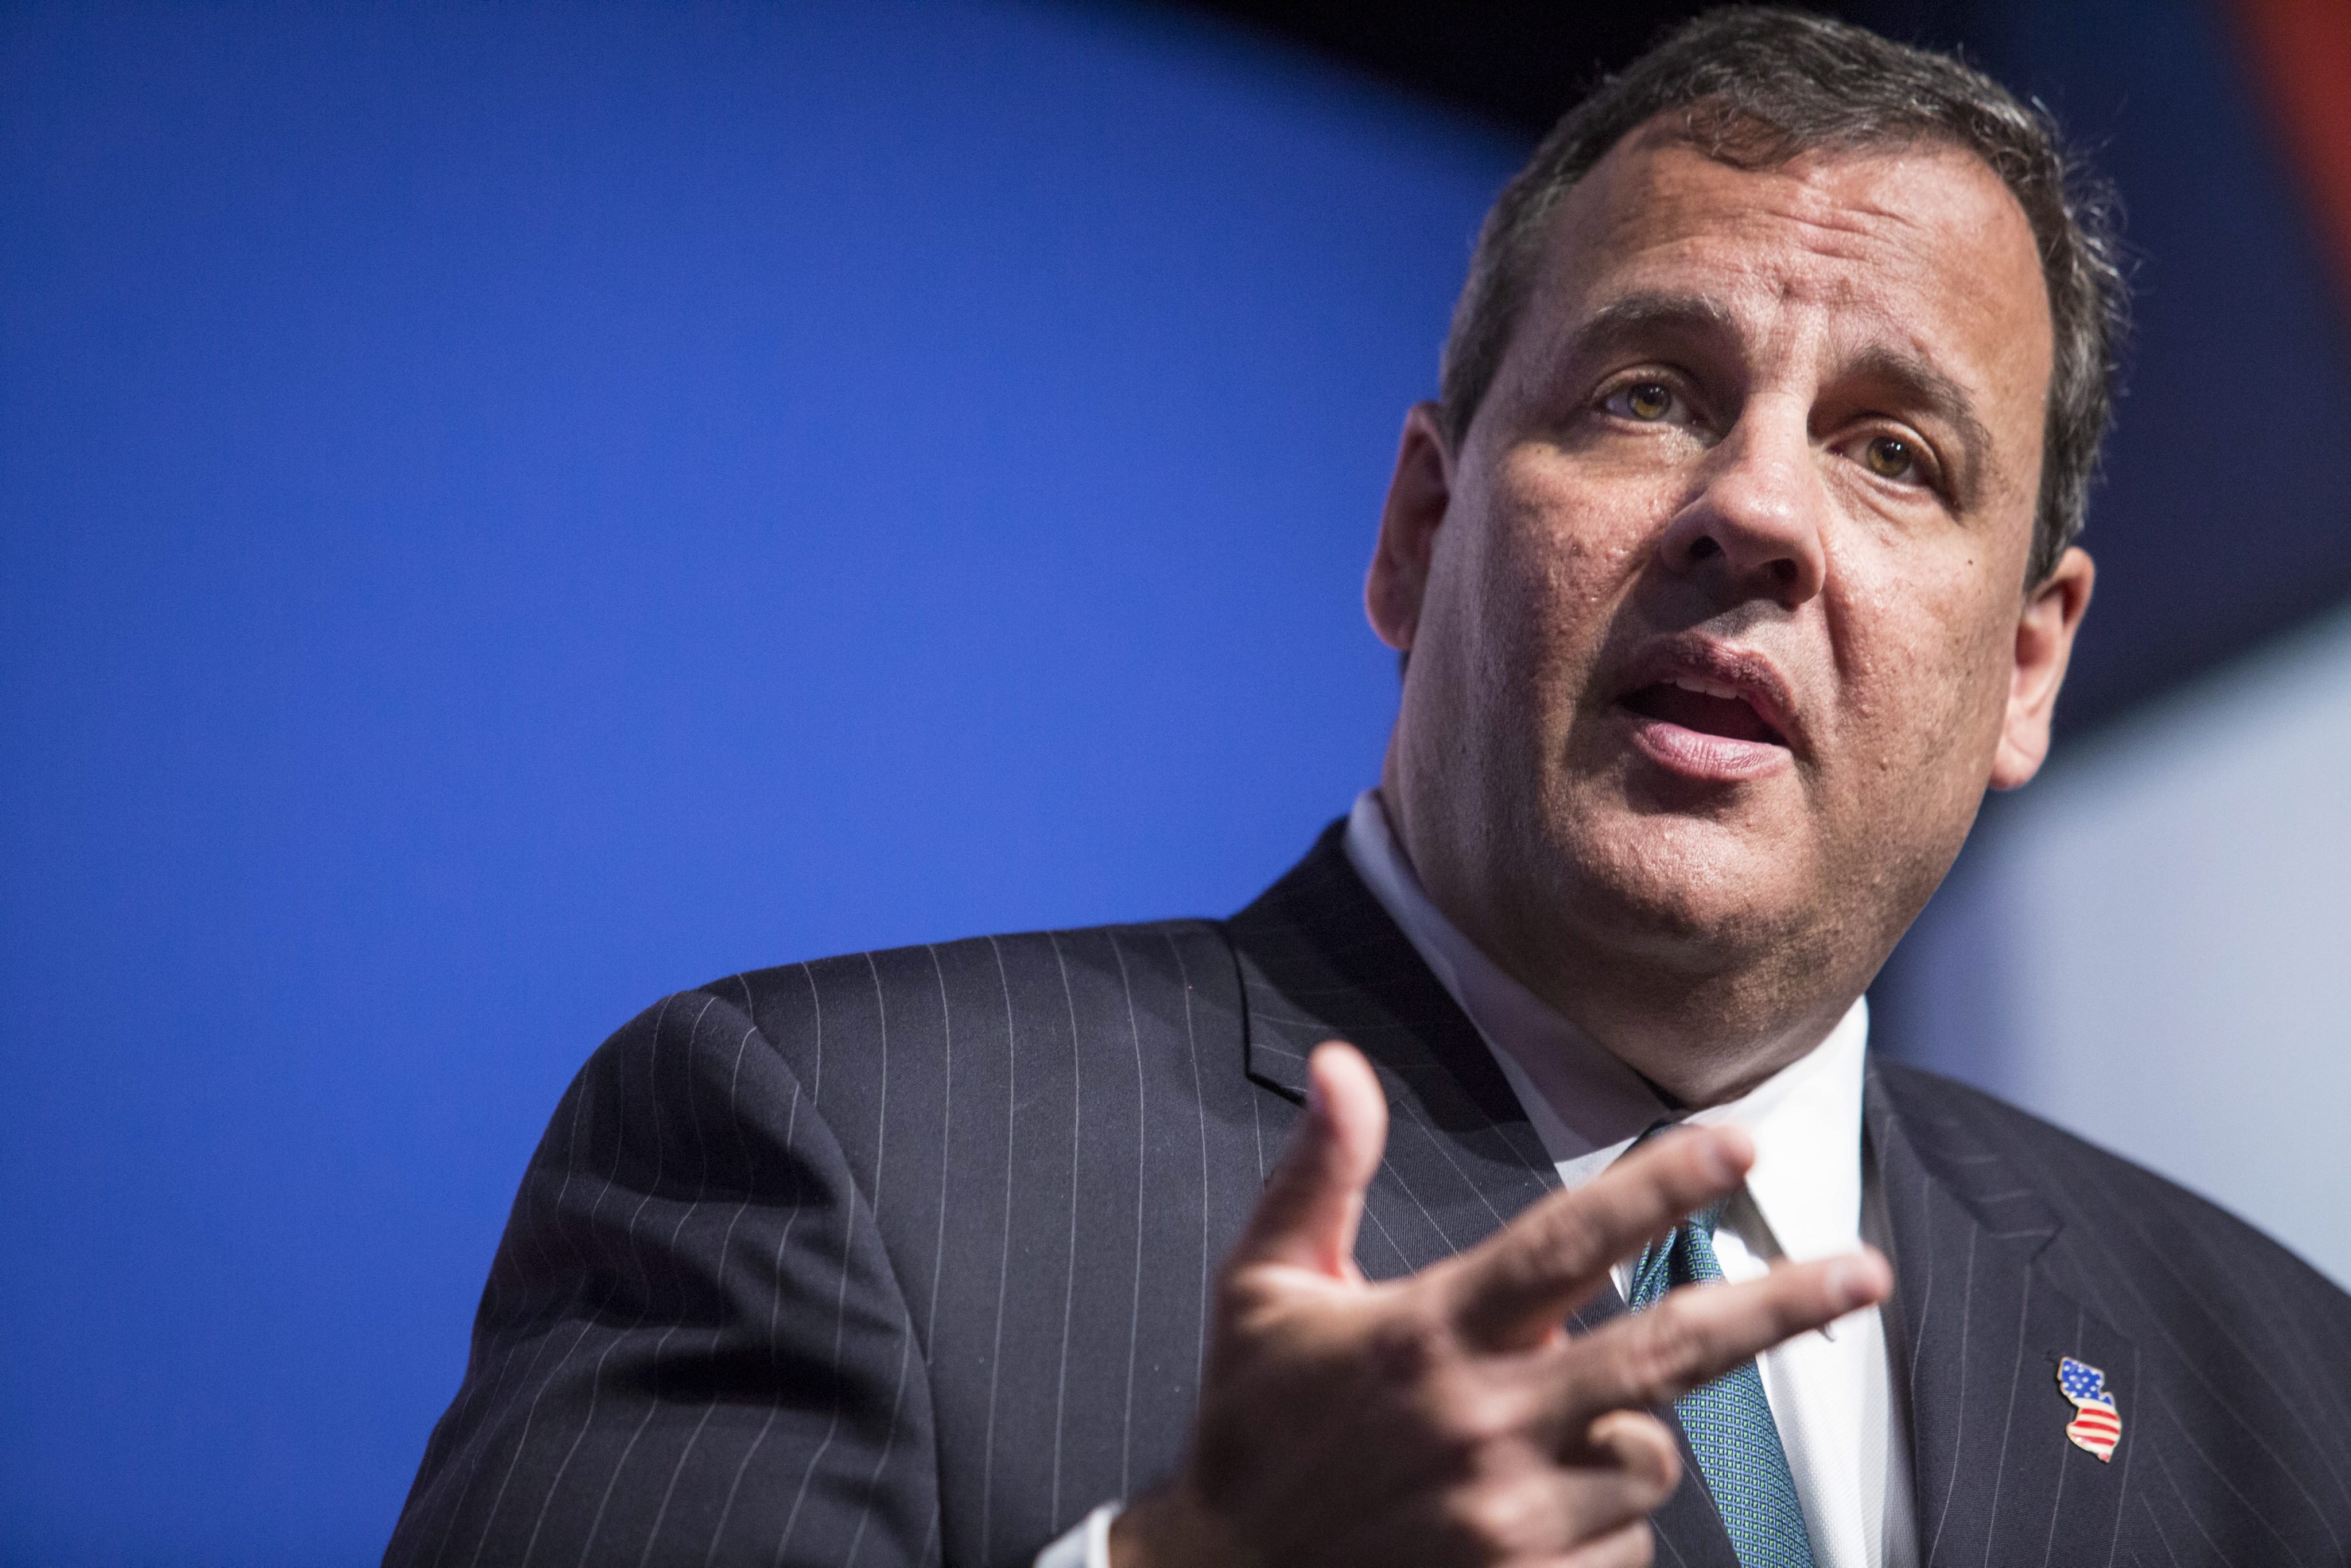 New Jersey Governor Chris Christie speaks during the Faith and Freedom Coalition's 'Road to Majority' conference in Washington D.C. on June 20, 2014. (Drew Angerer—EPA)